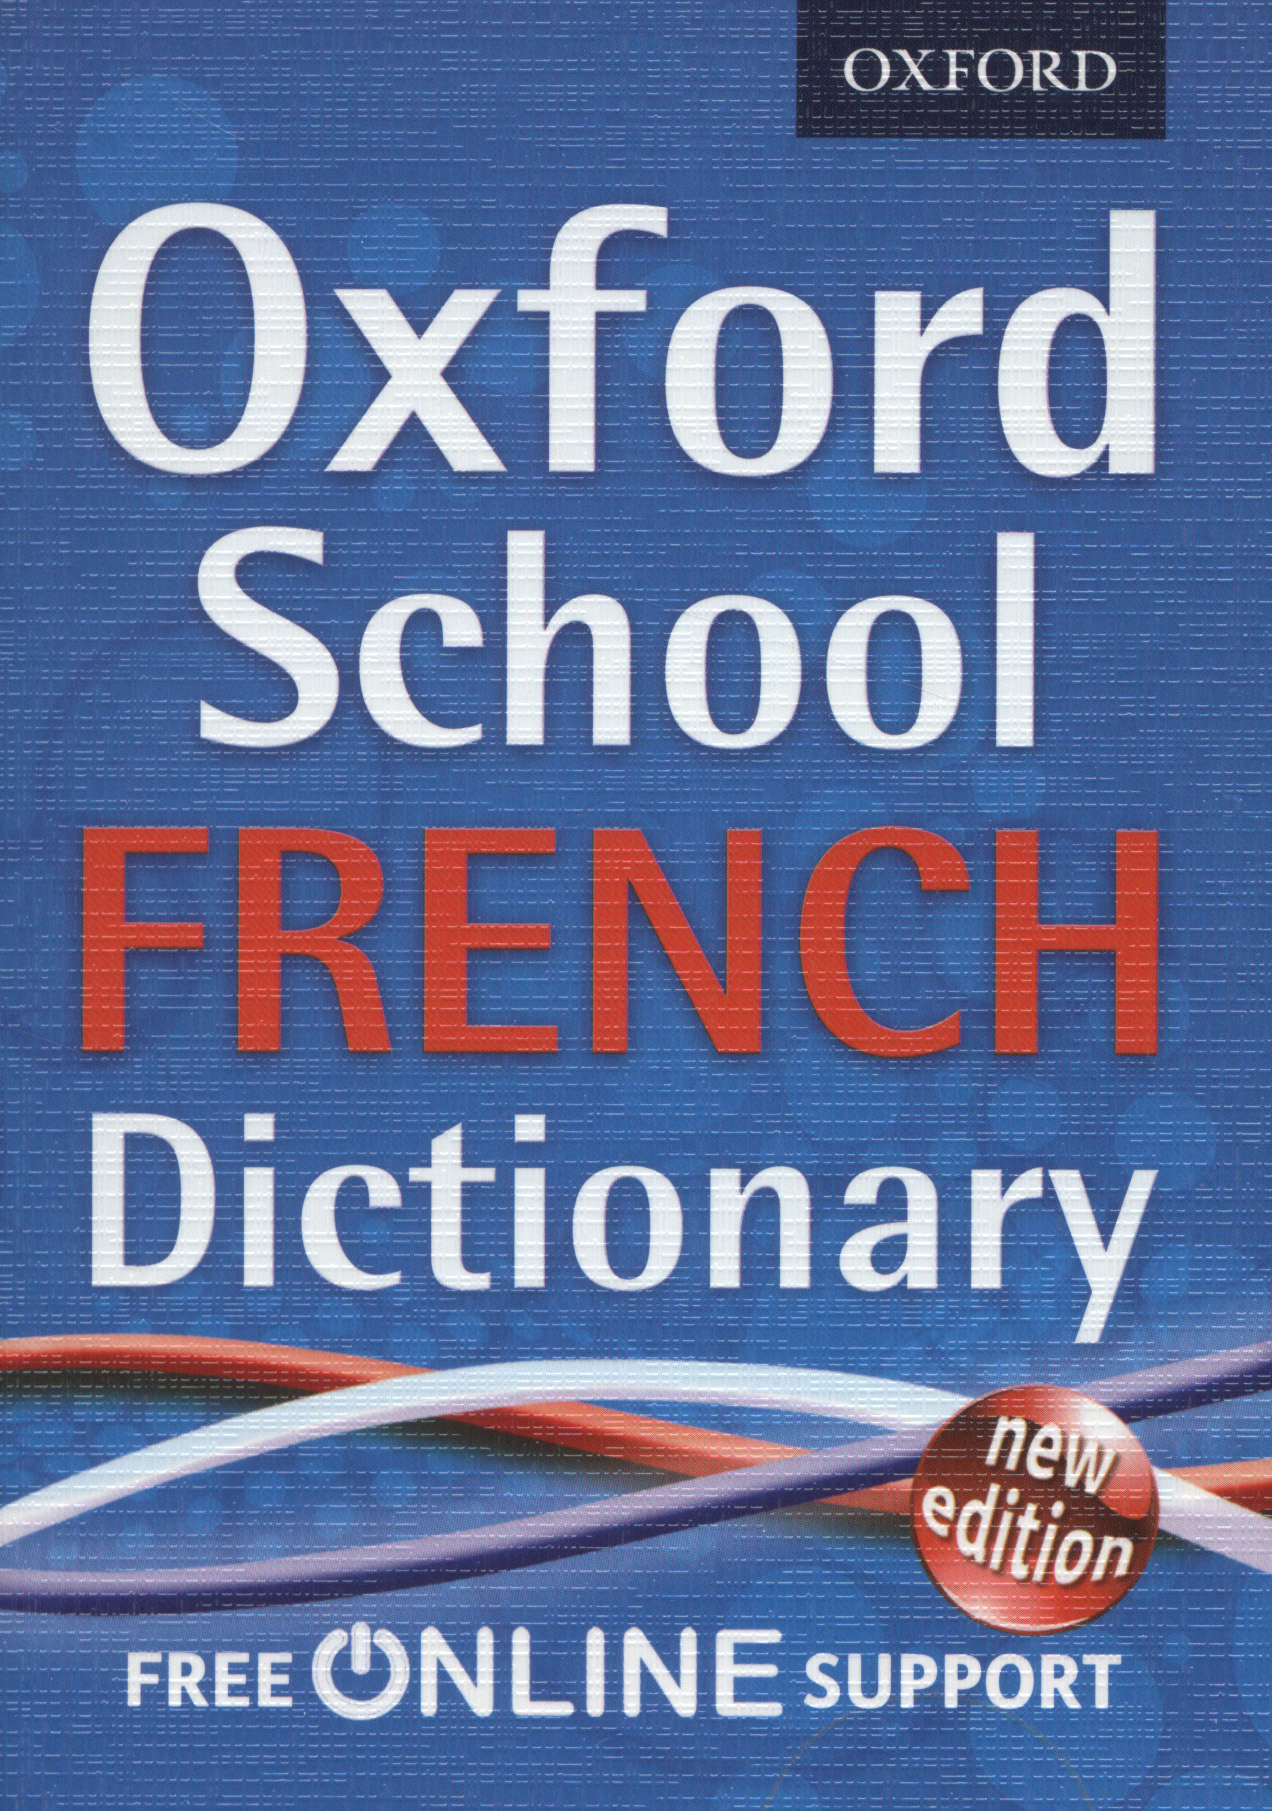 French dictionary. Oxford Dictionary. Oxford French Mini Dictionary. Oxford School books.